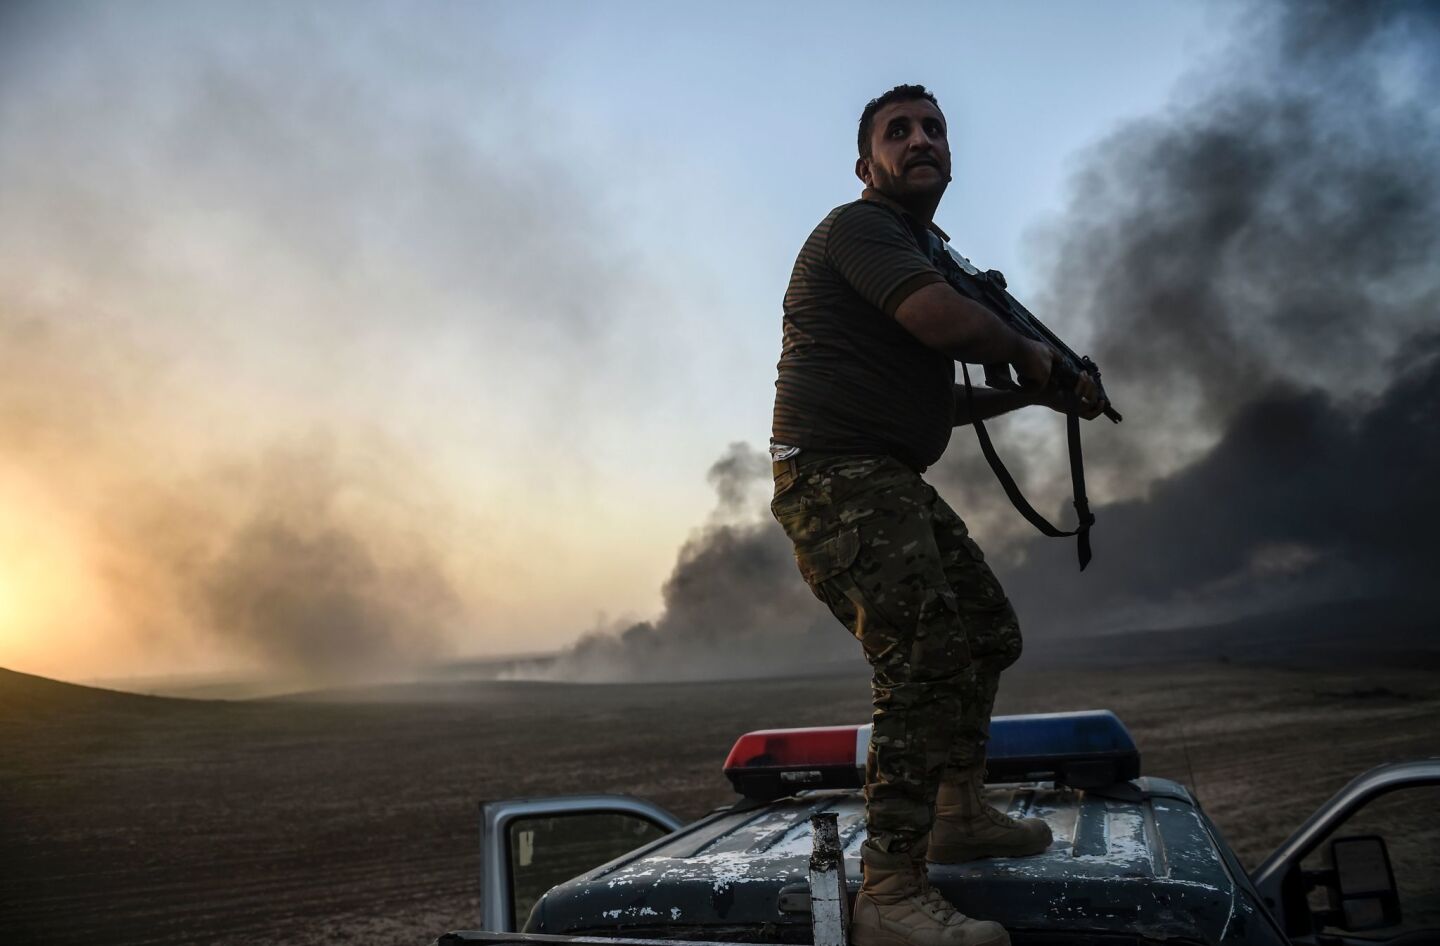 An Iraqi fighter takes a position on top of a vehicle as smoke rises on the outskirts of the Qayyarah area, 35 miles south of Mosul, during an operation against Islamic State.